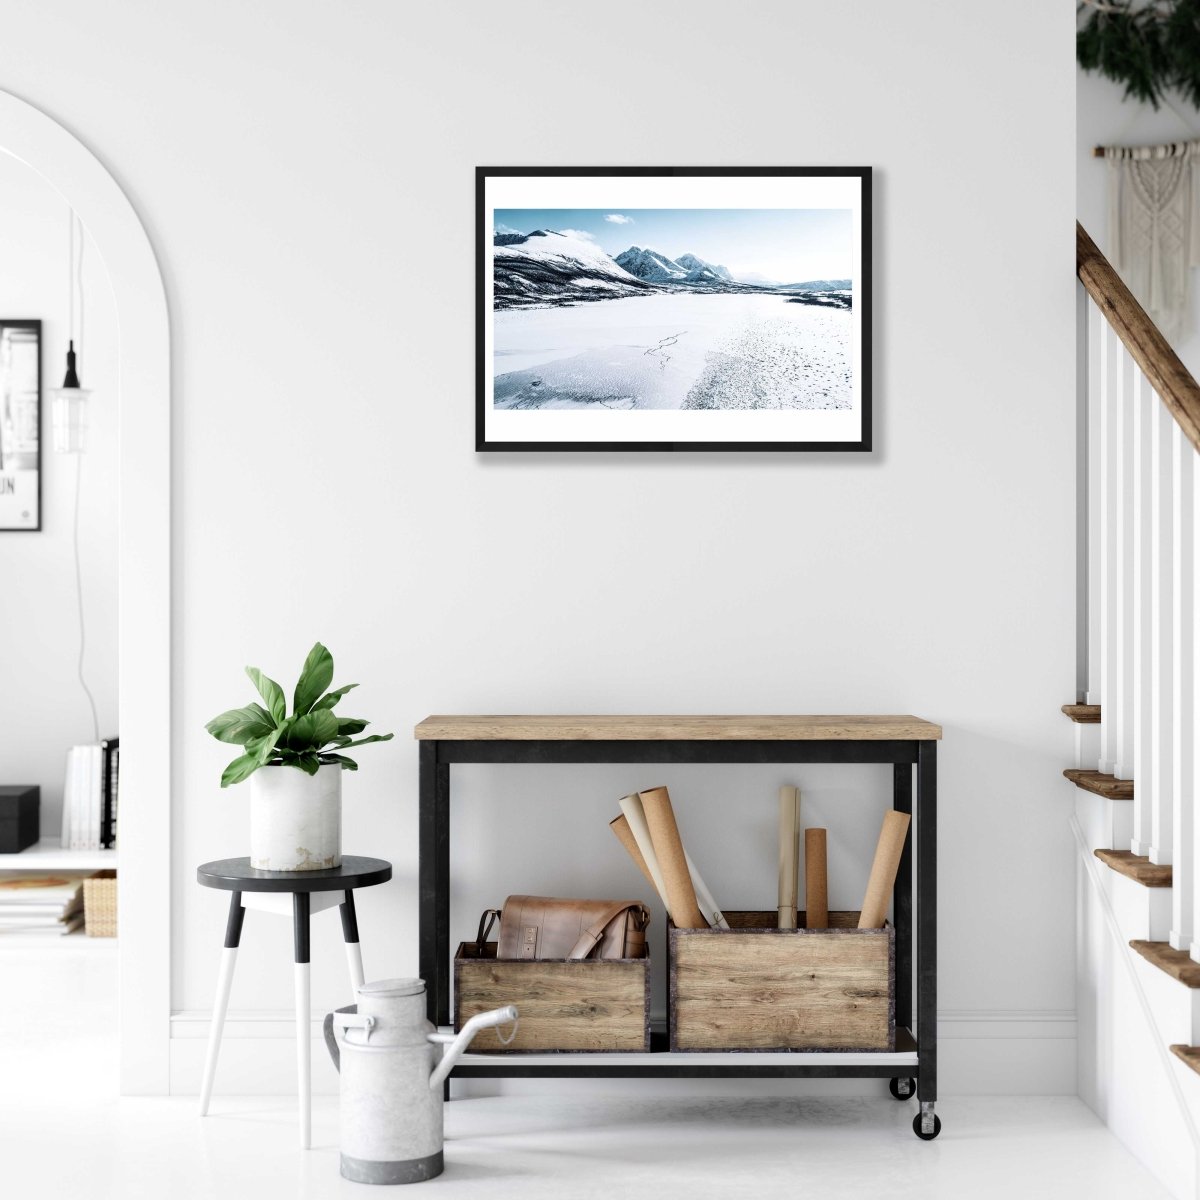 Framed frozen Norwegian fjord photo, snow-capped mountains in background, white living room wall.